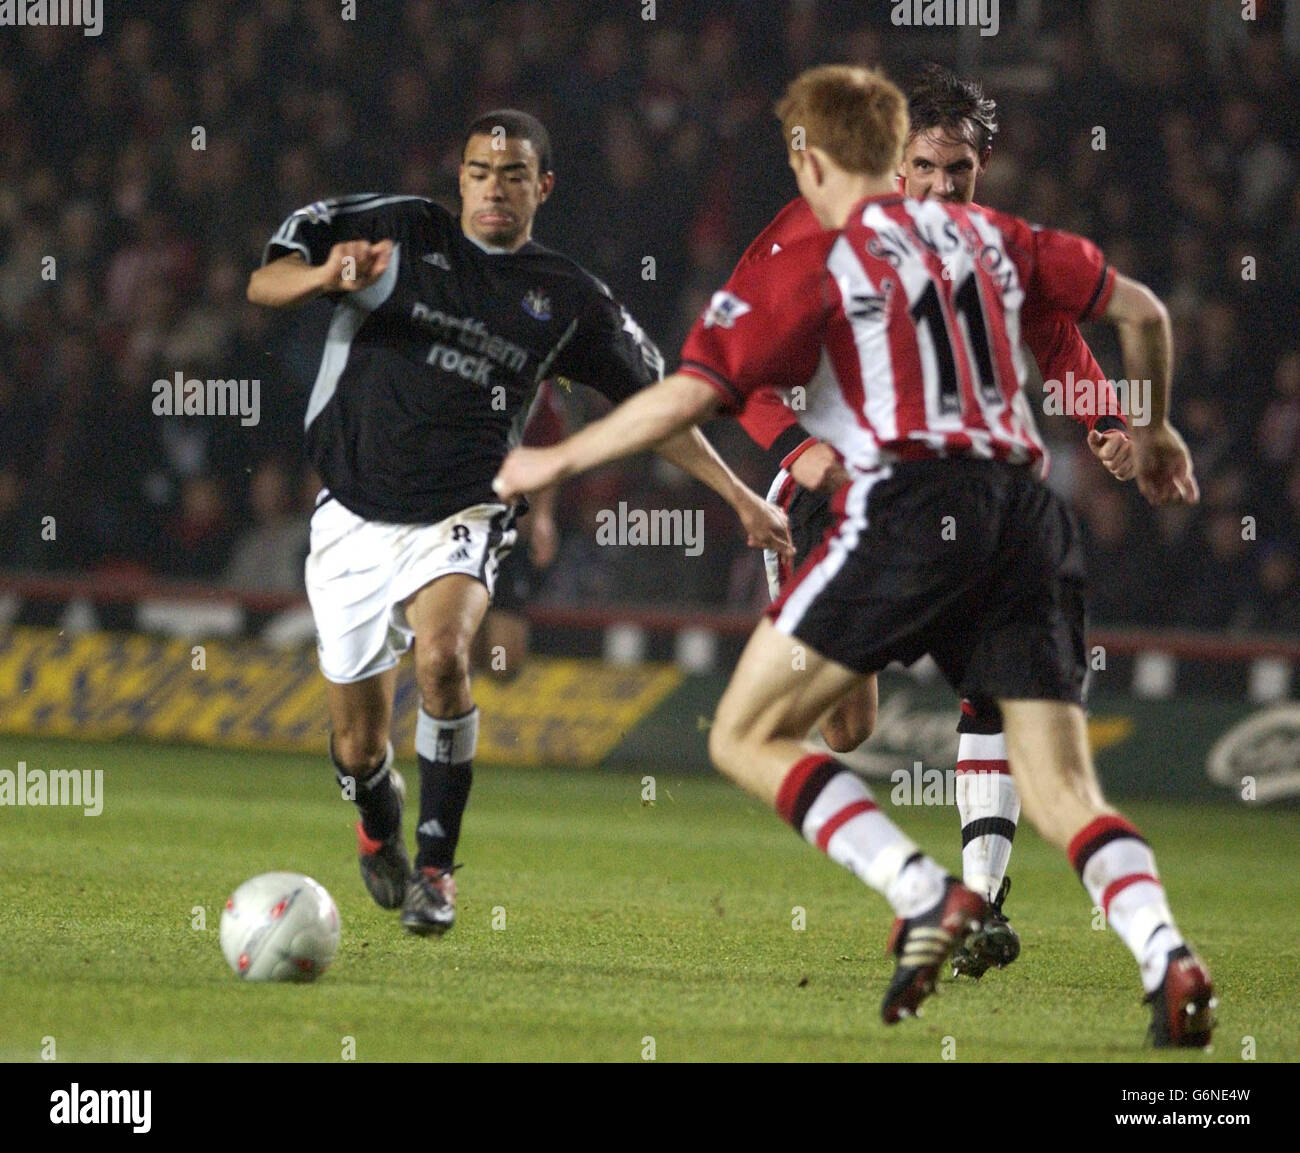 Newcastle United's Kieron Dyer (left) breaks through the Southampton defence on his way to score his second goal during the FA Cup Third Round match at Southampton's St Mary's Stadium. Stock Photo